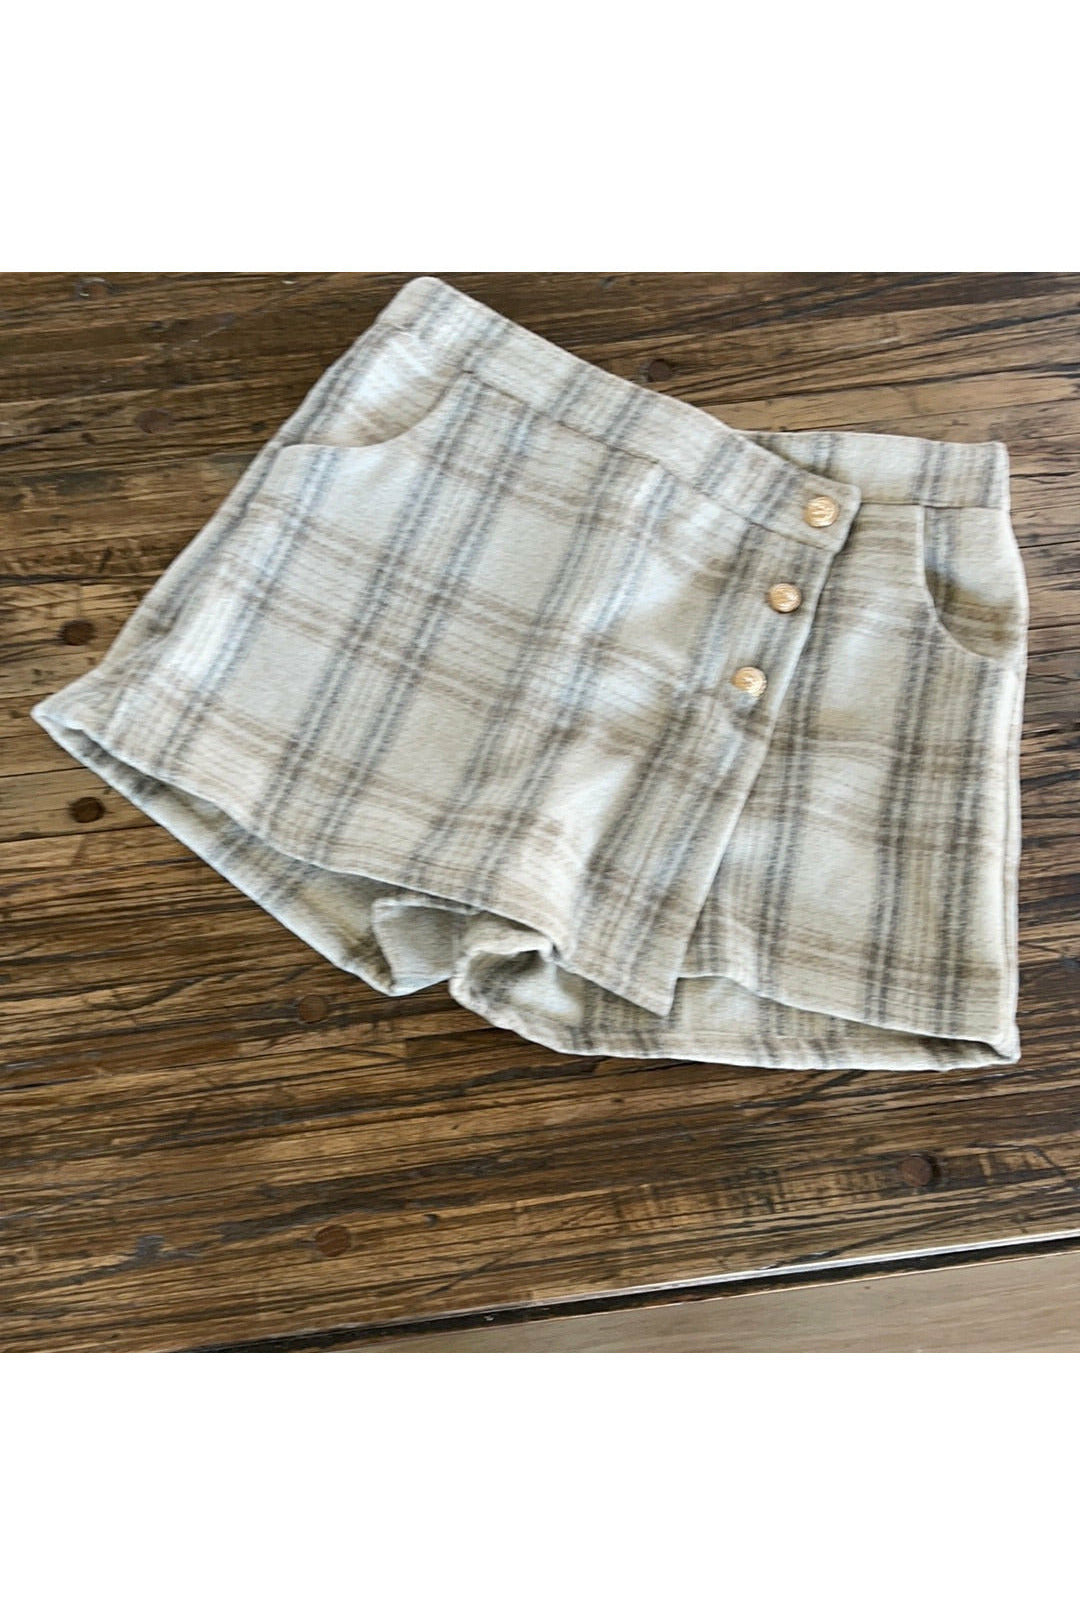 Walk in the park wool shorts